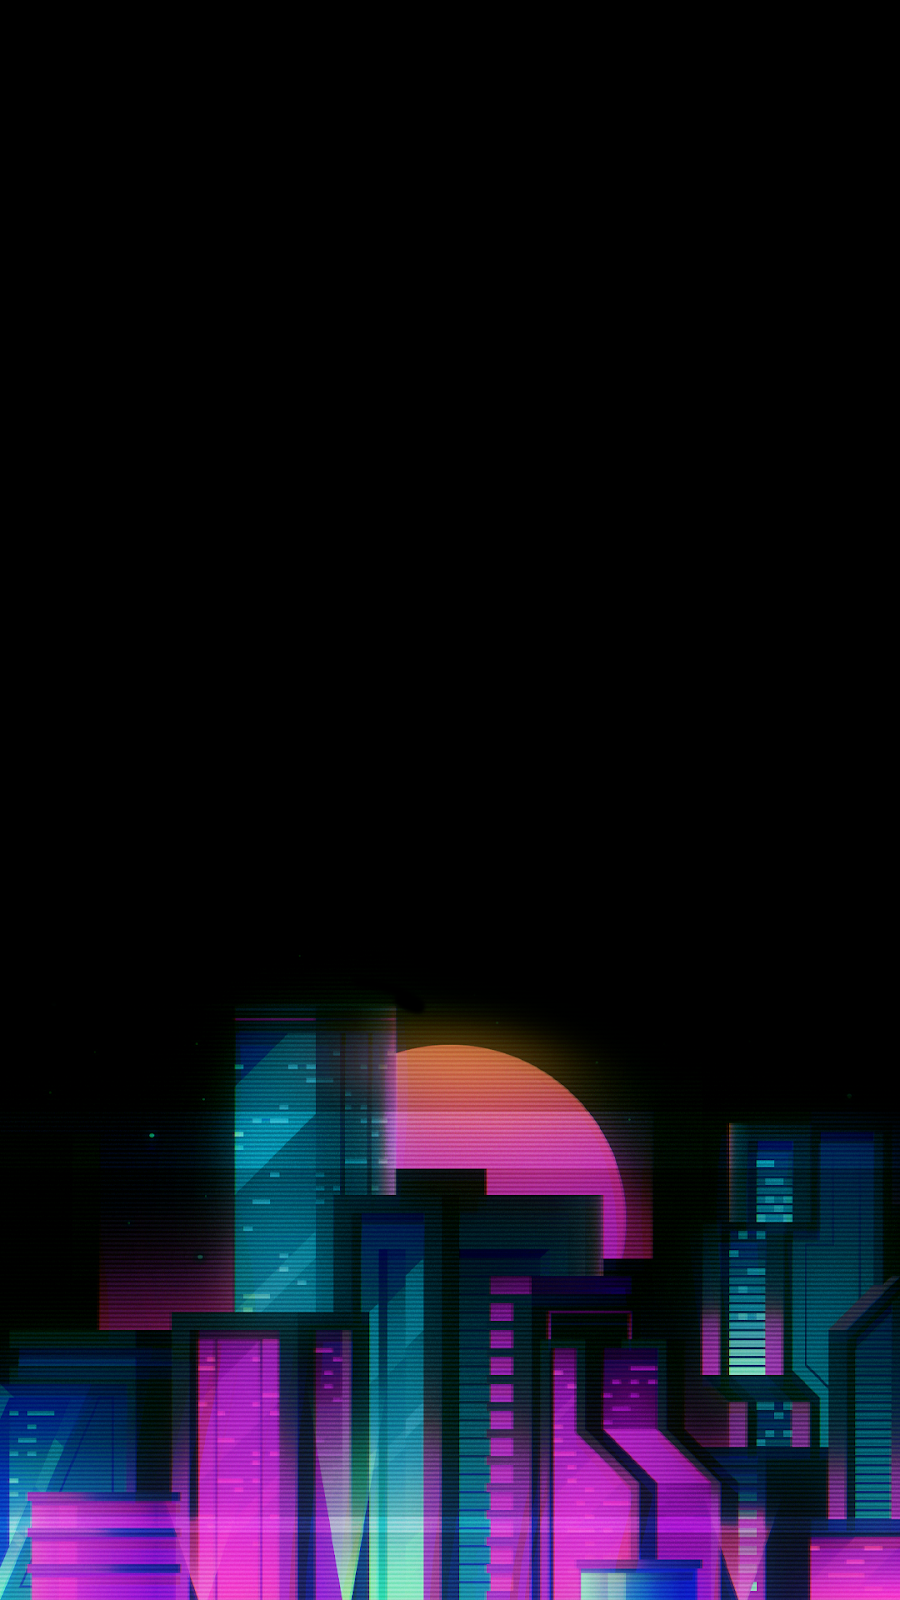 Mobile Cyberpunk Amoled Wallpapers - Wallpaper Cave